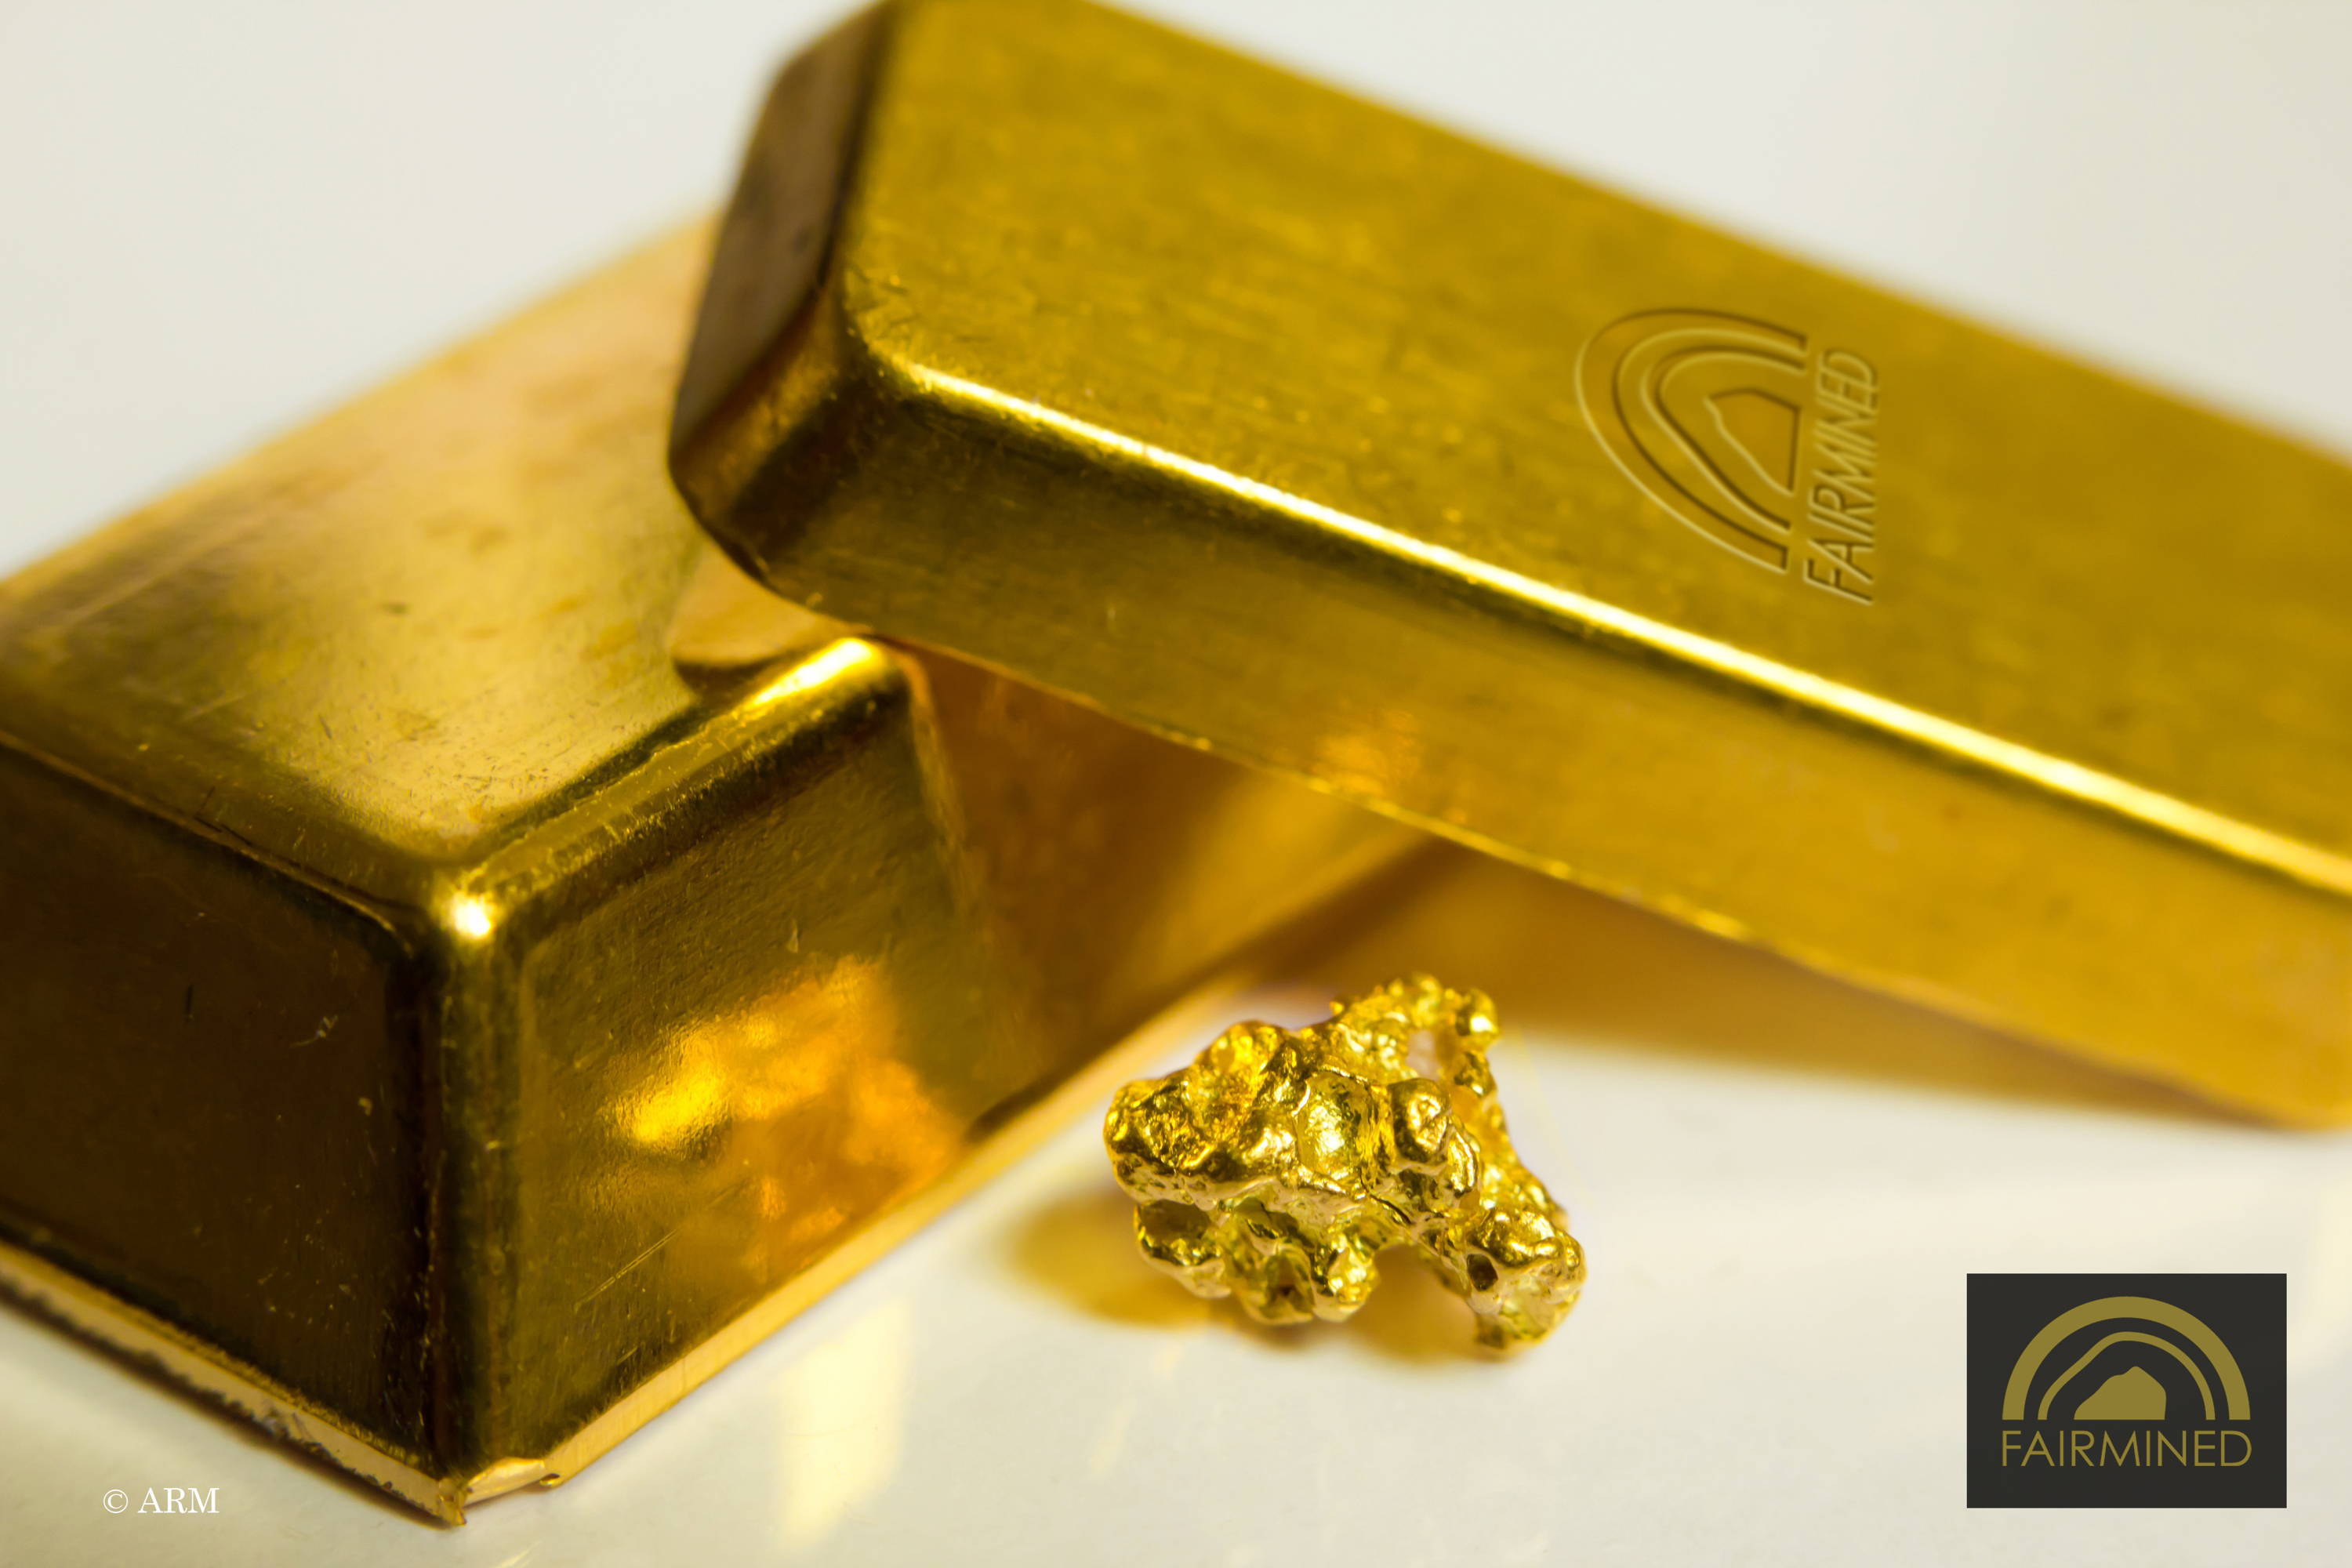 Gold bars of Fairmined gold